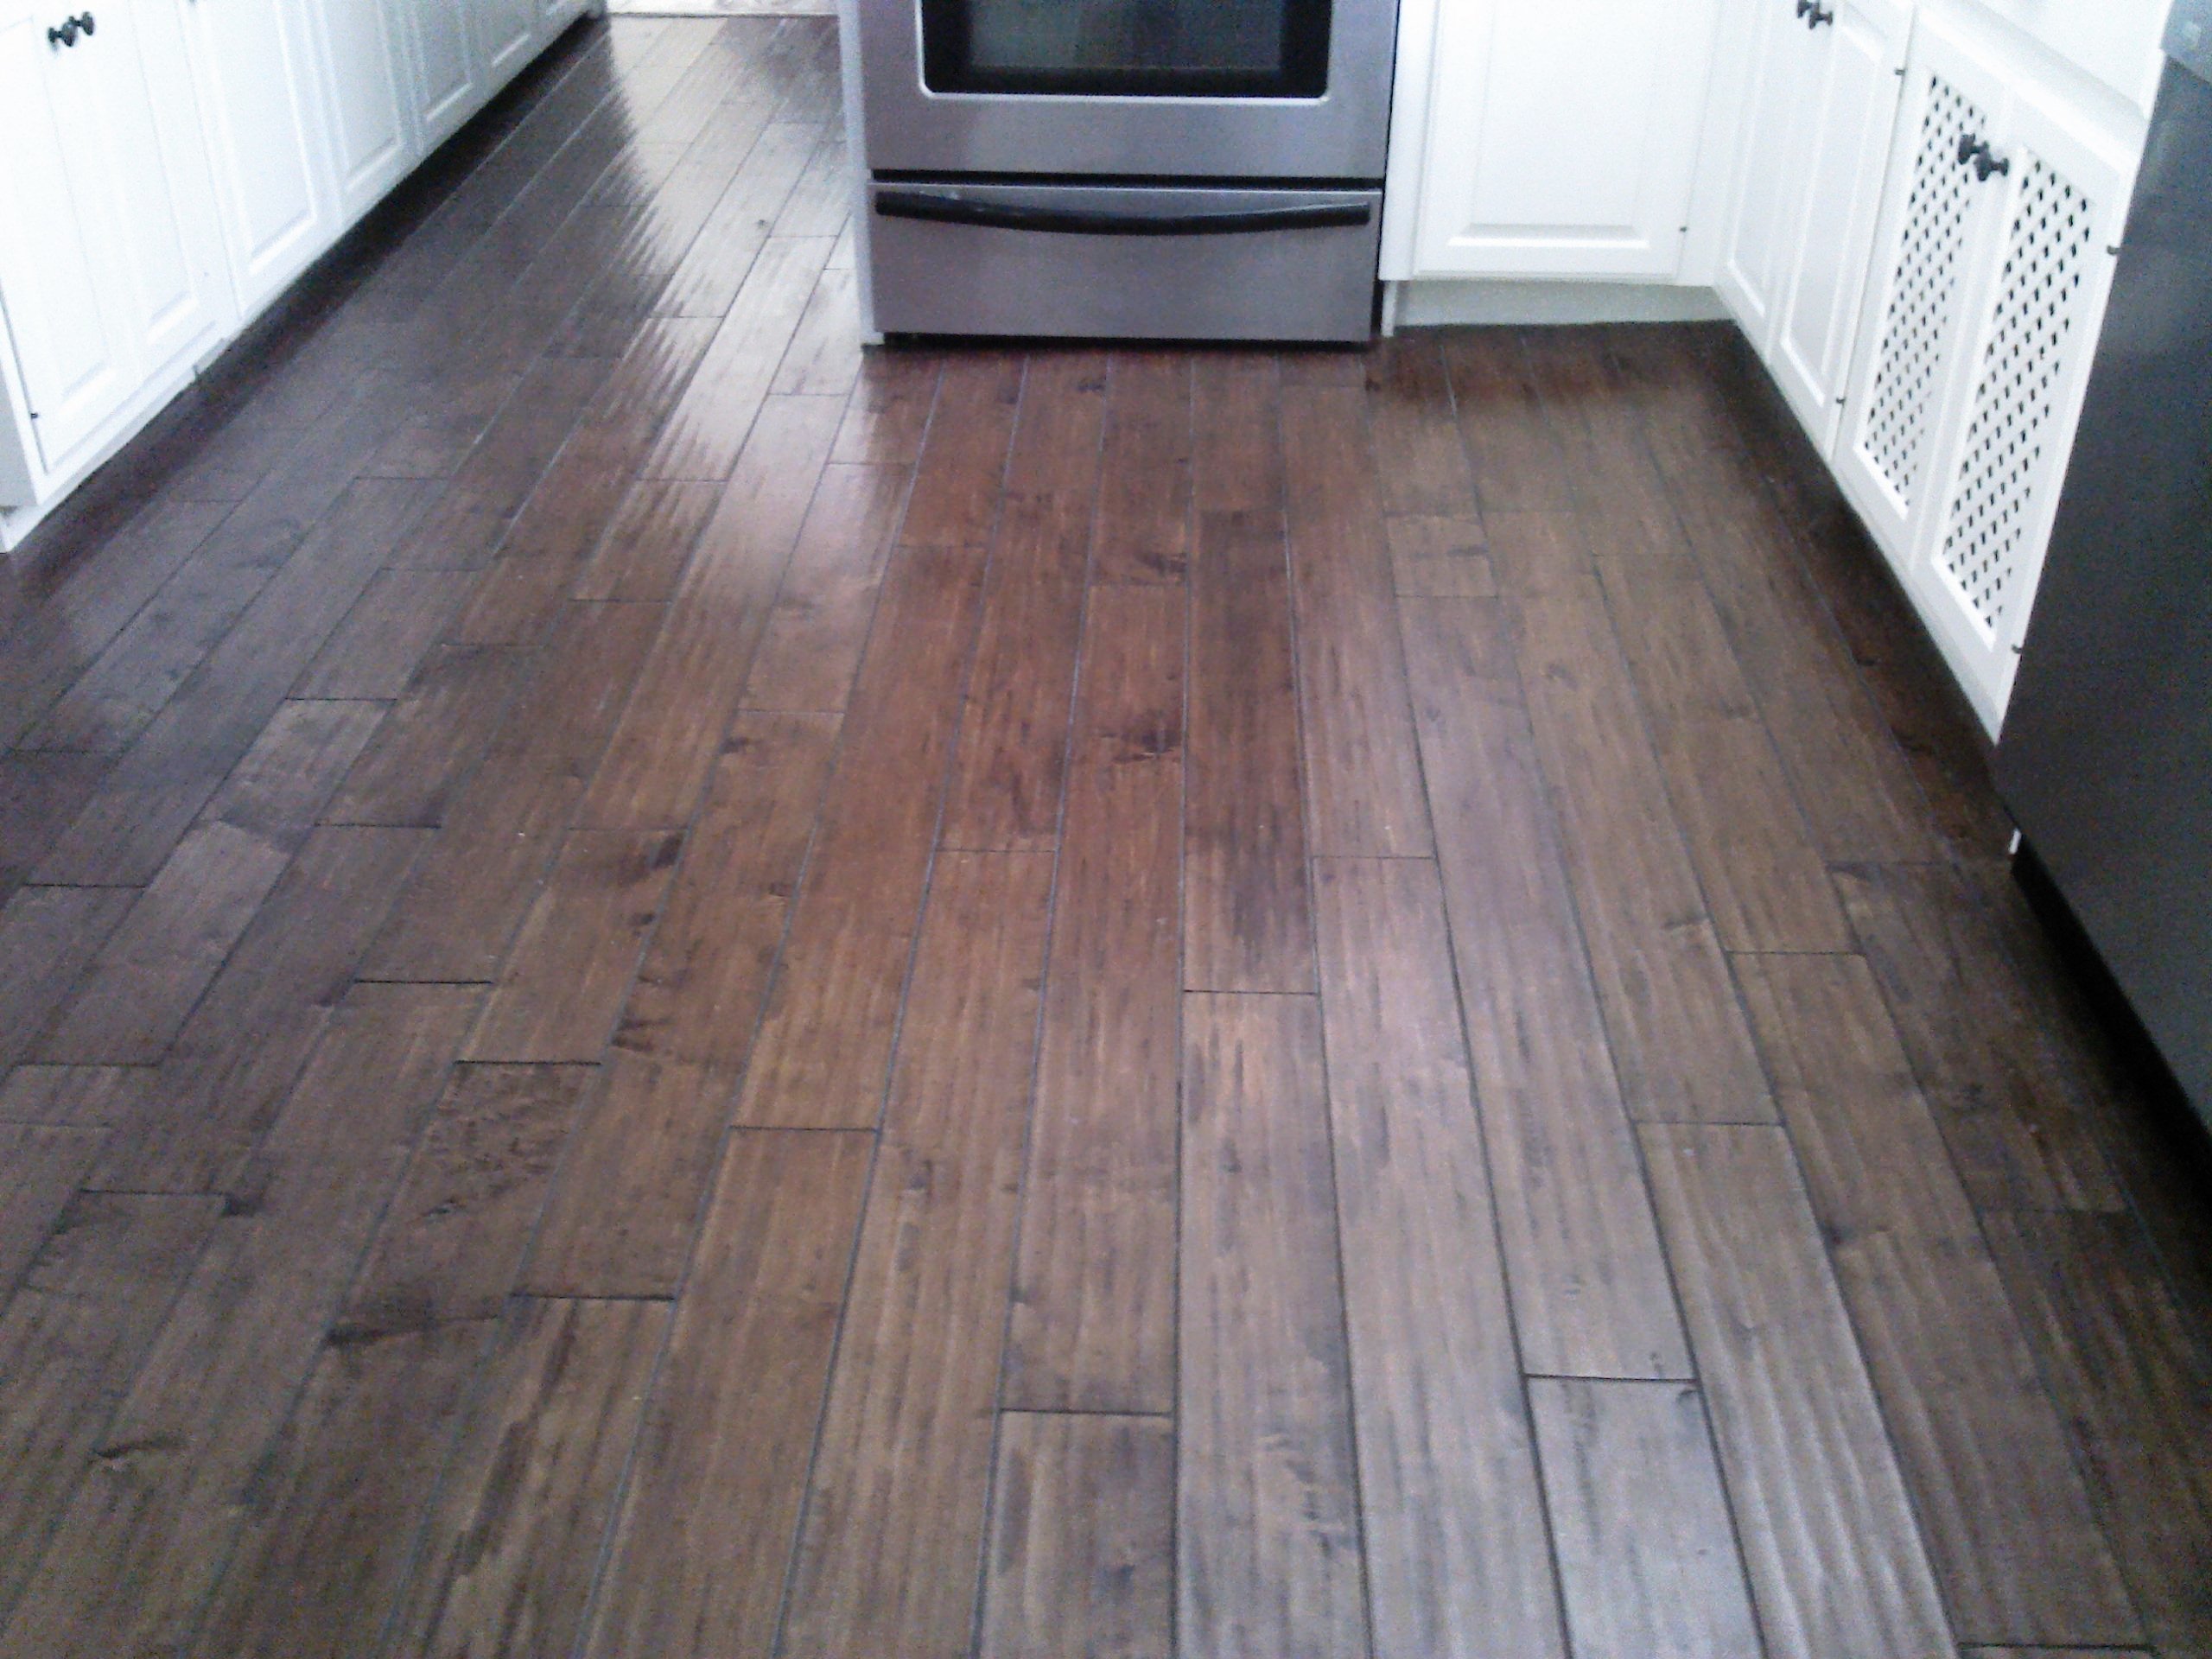 Laminate Wood Flooring In Kitchen, What Is The Best Brand Of Laminate Wood Flooring